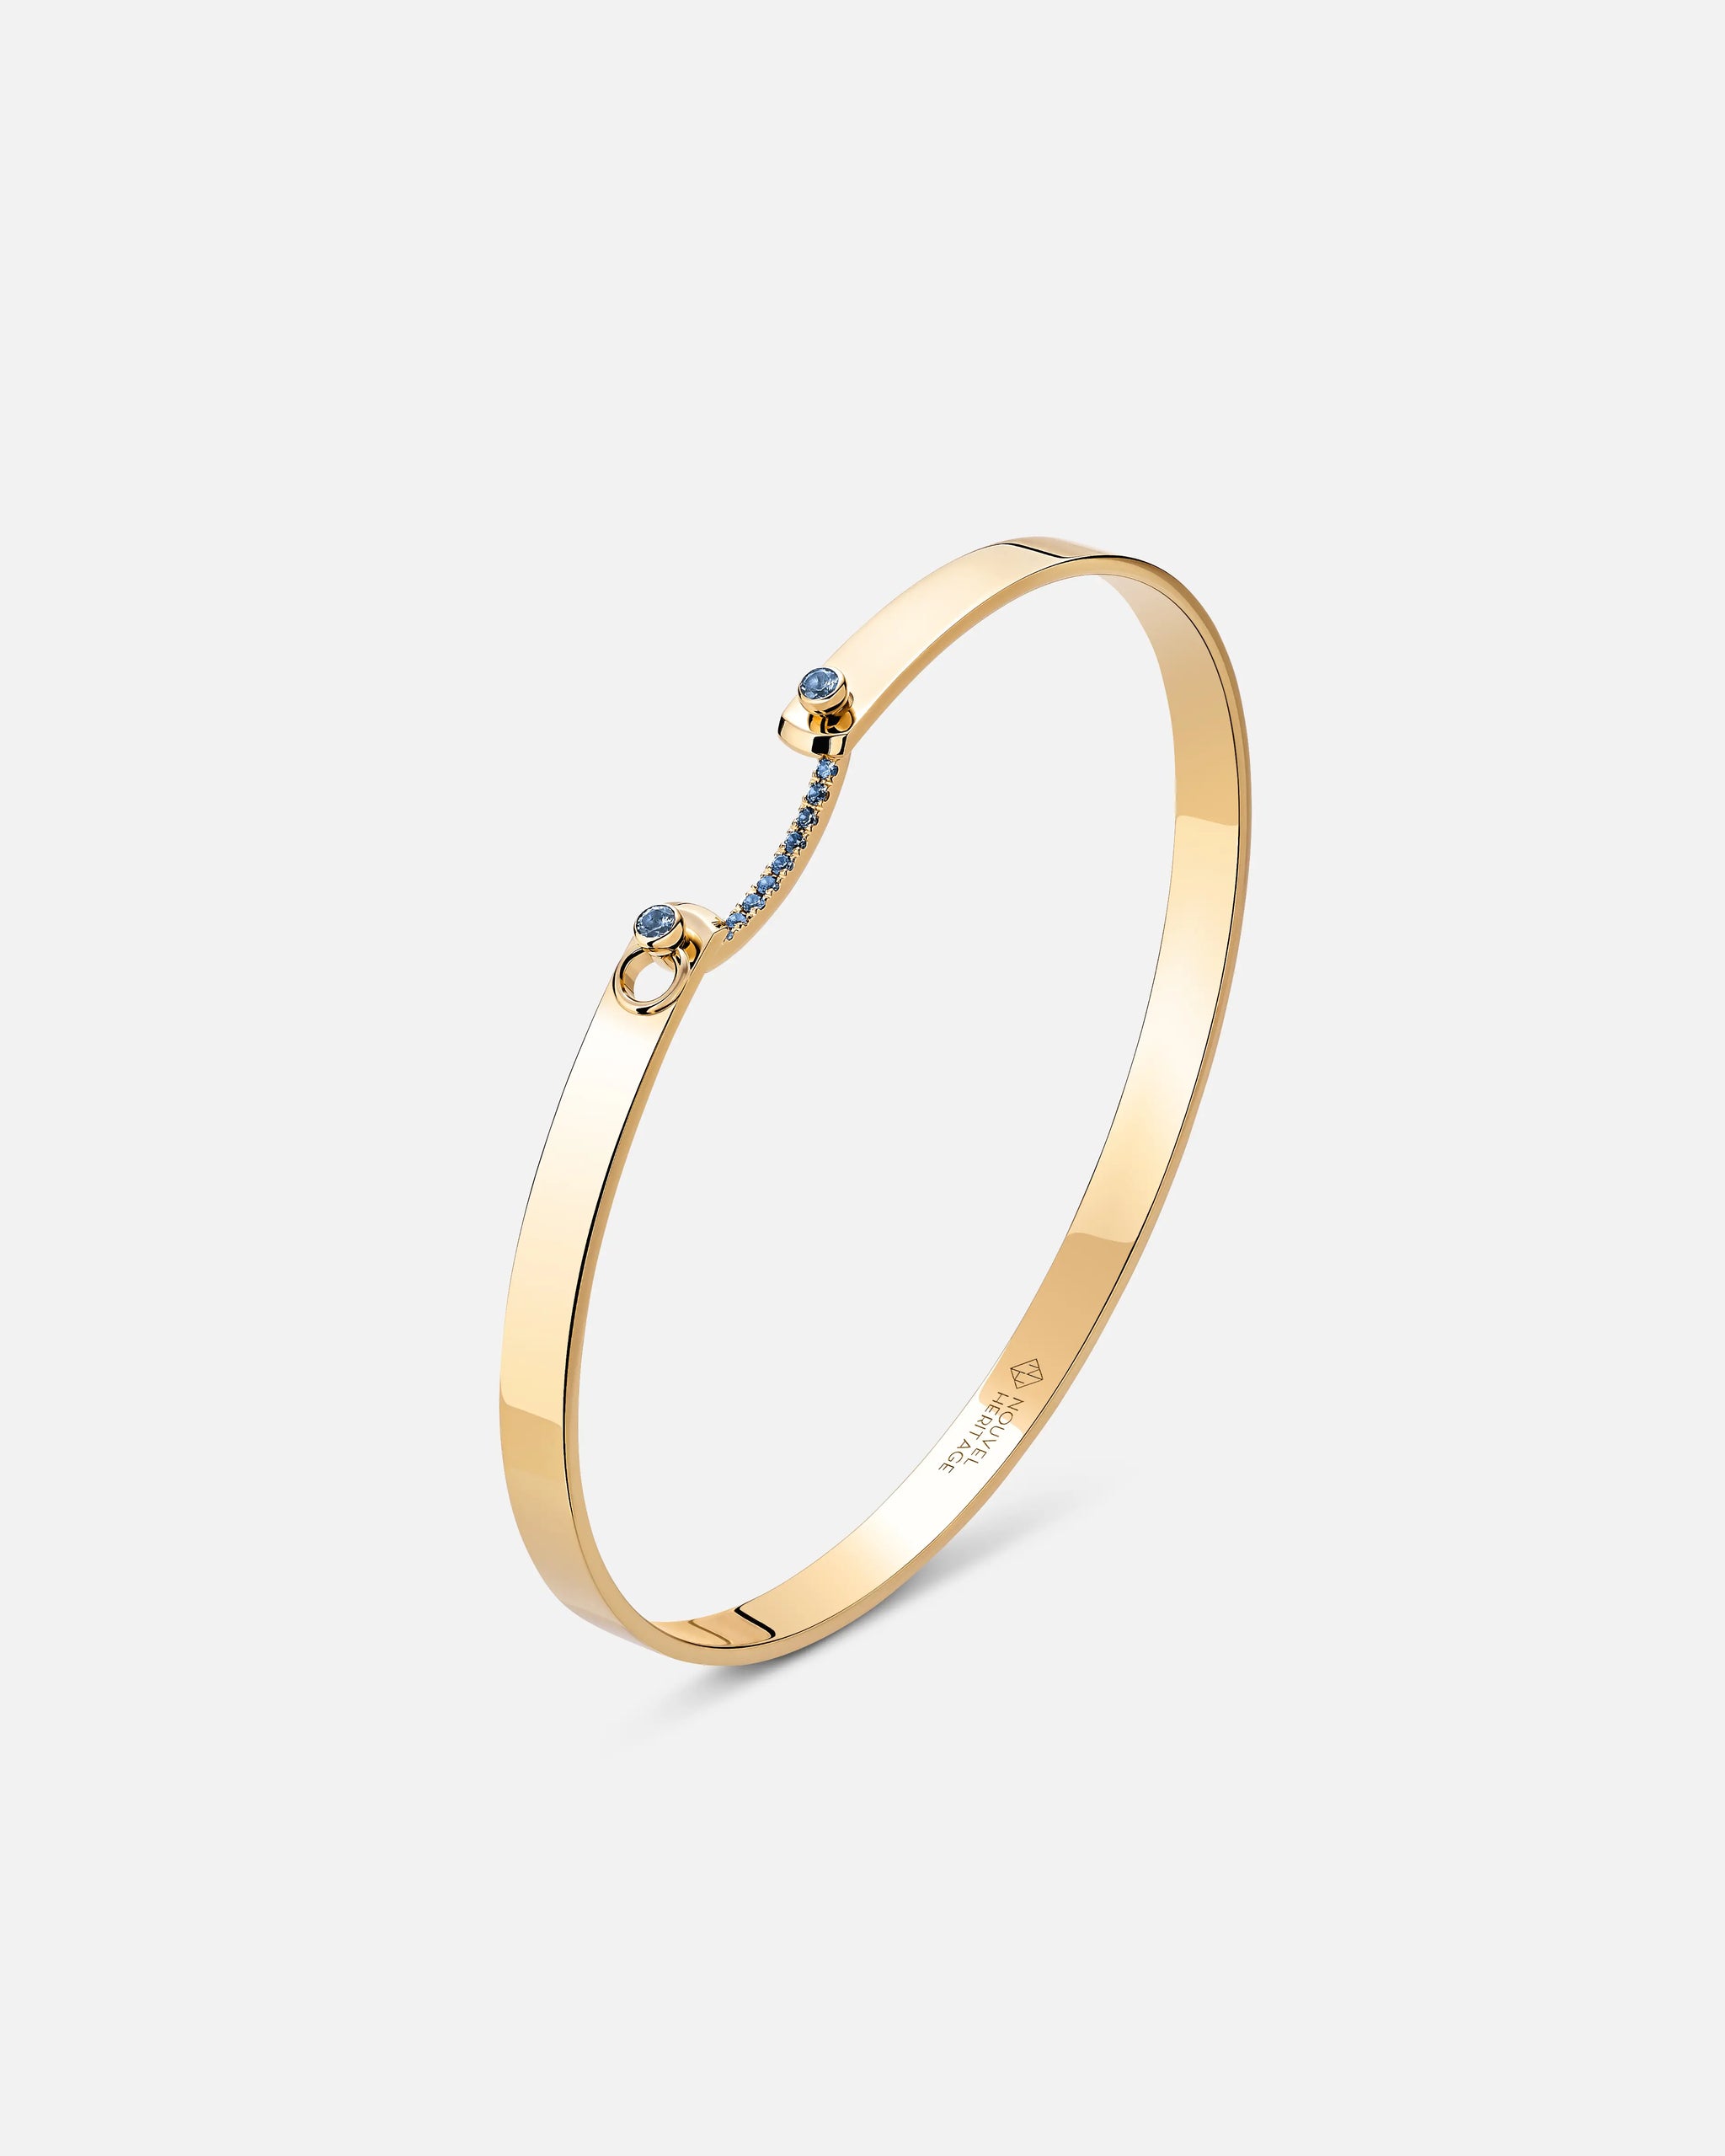 Baby Blue Mood Bangle in Yellow Gold - 1 - Nouvel Heritage